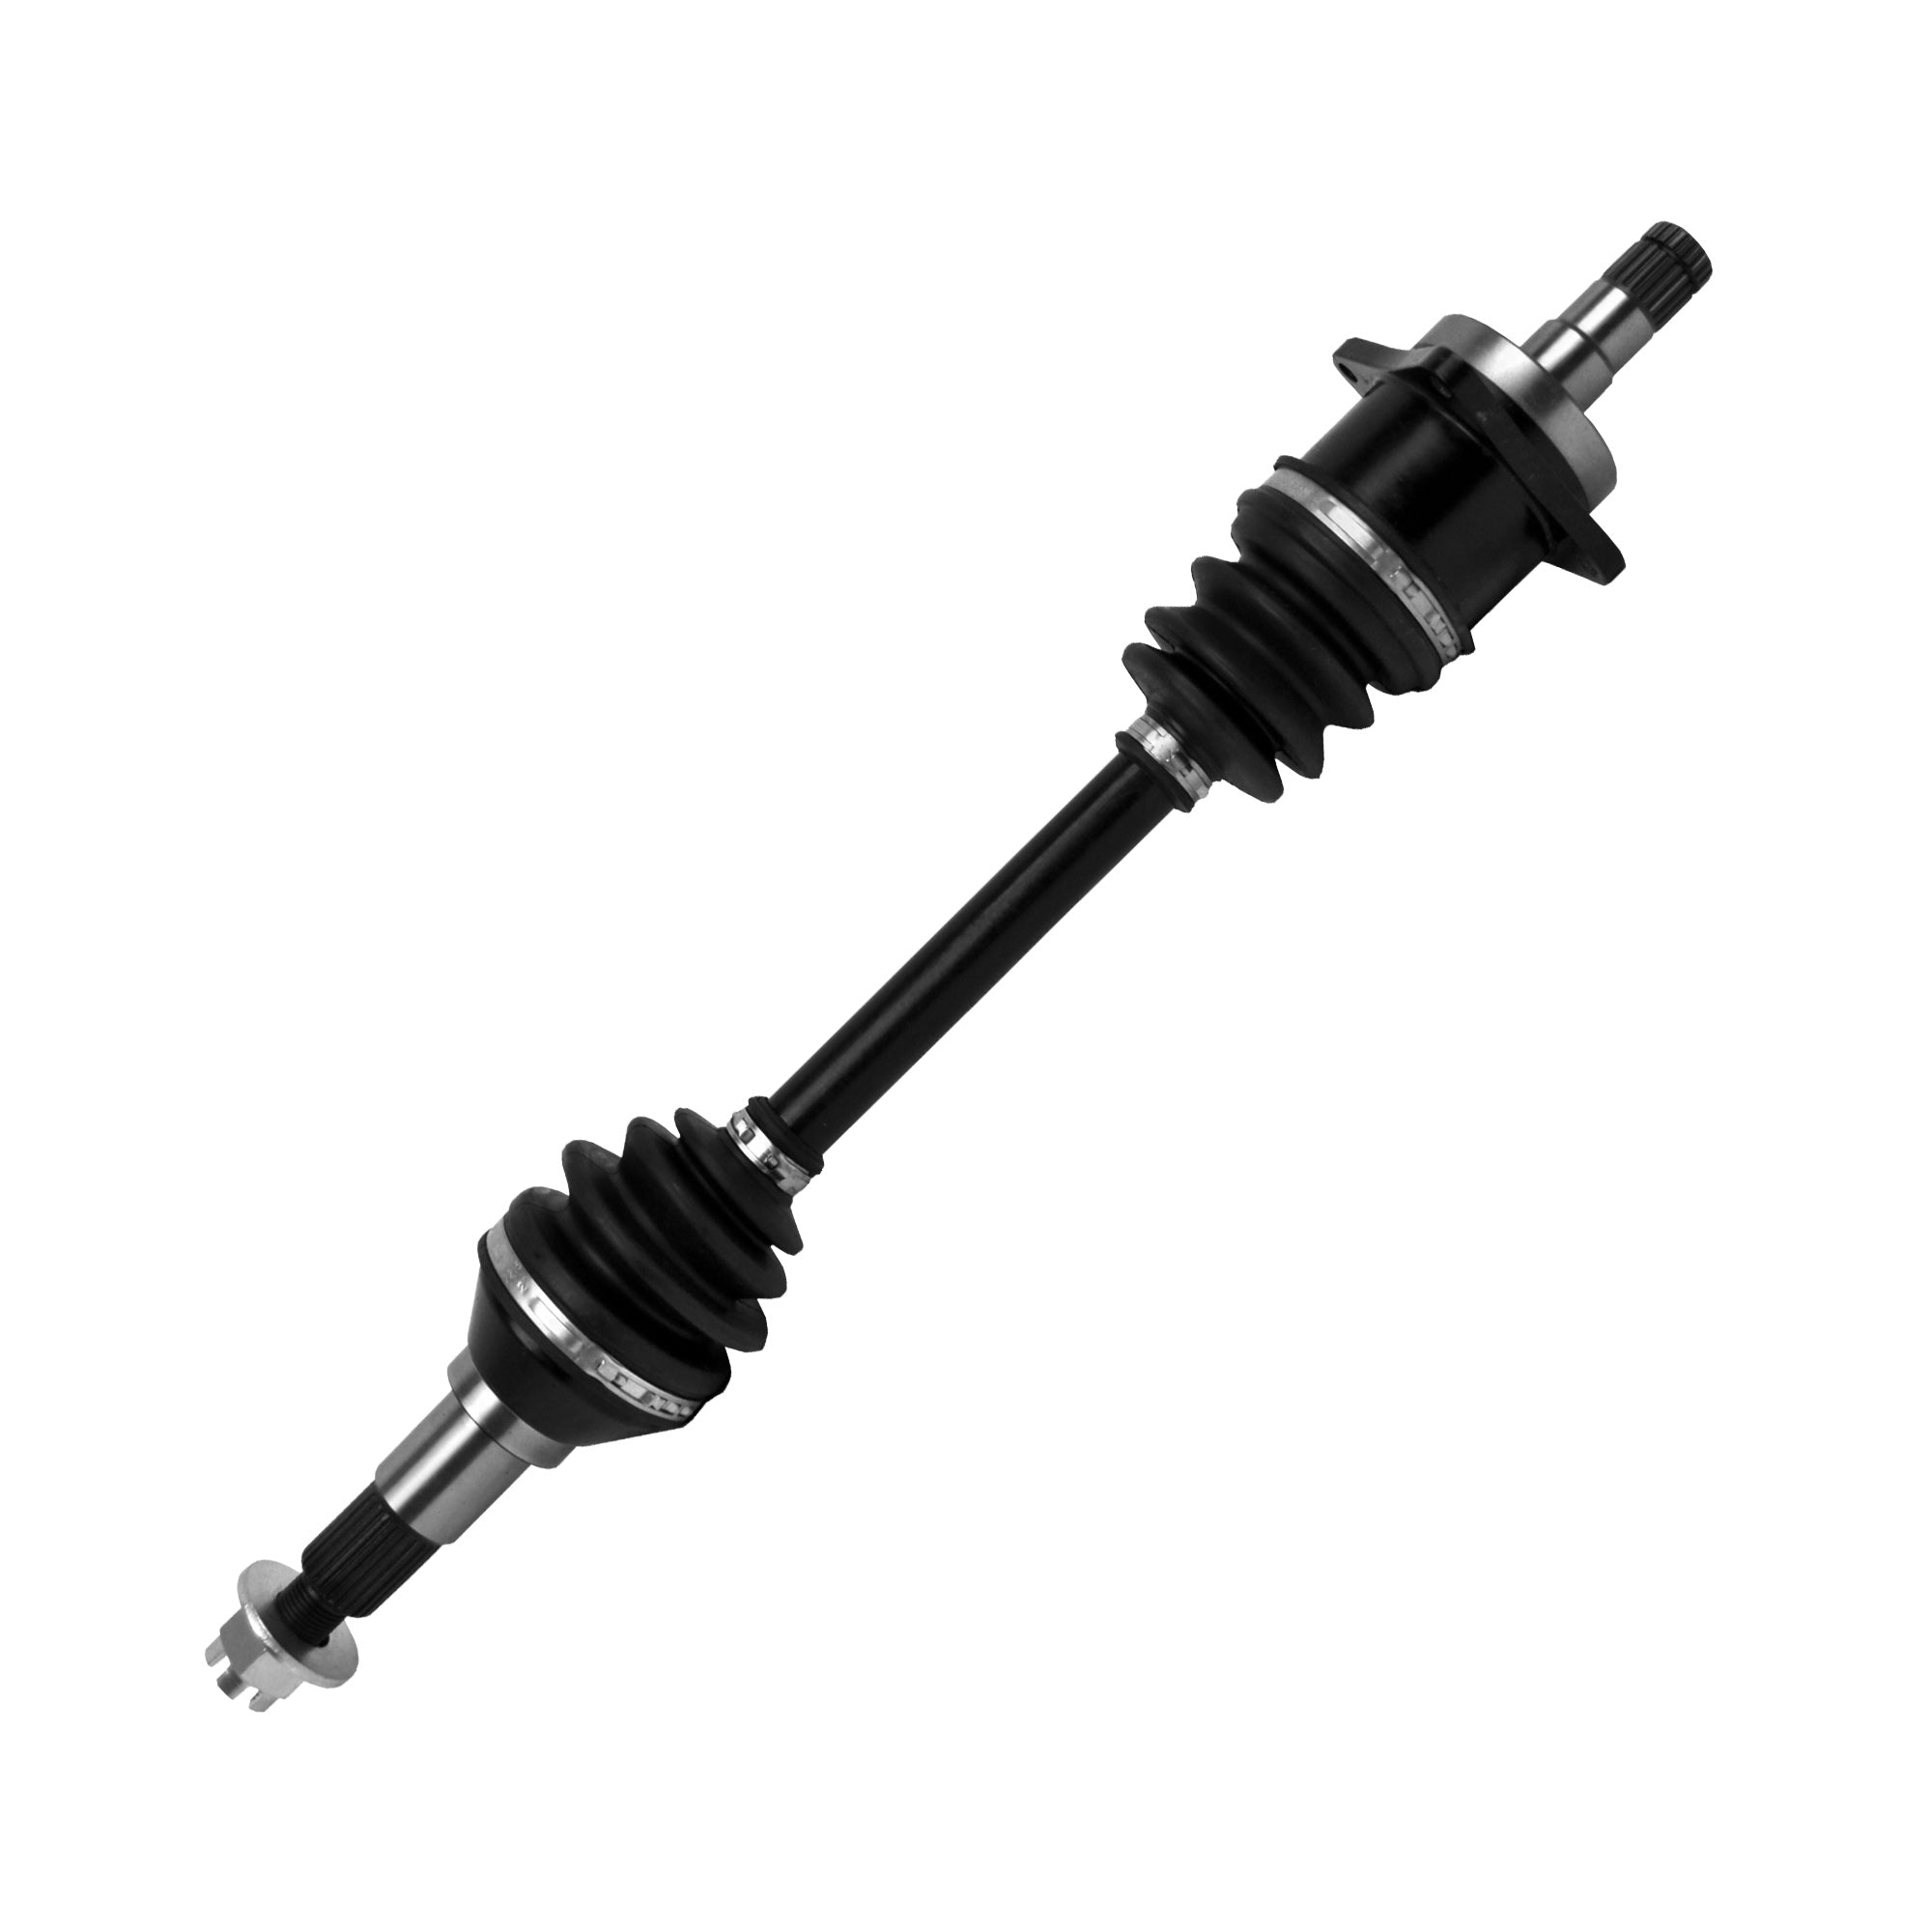 Performance Axle for Can Am Outlander 400 